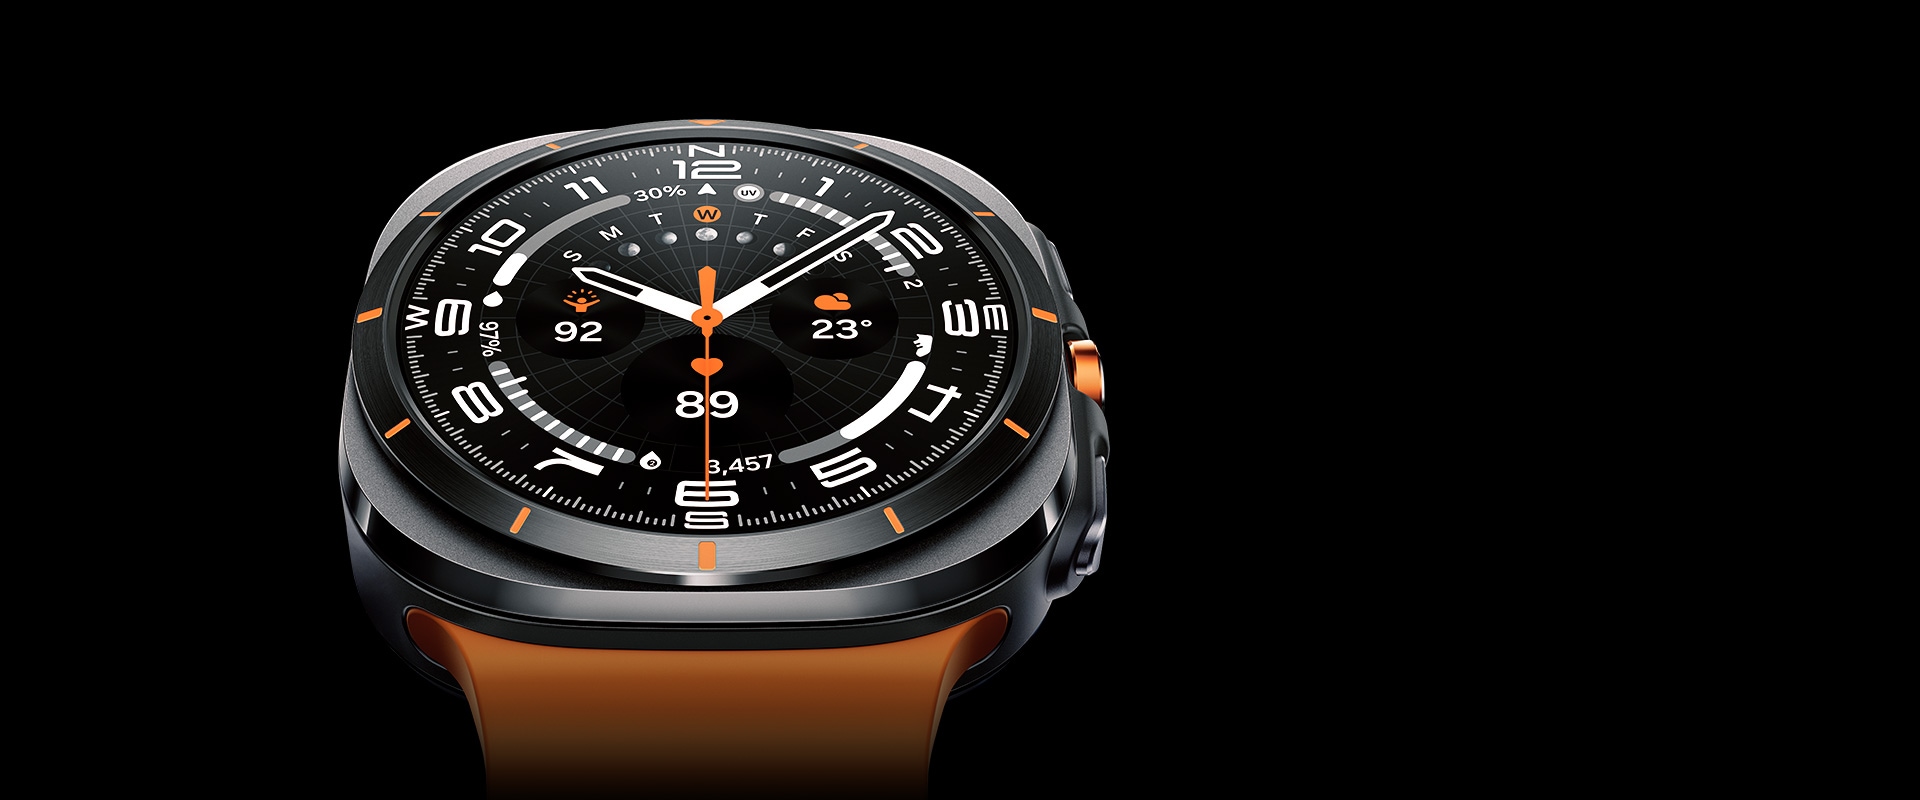 A Galaxy Watch Ultra is seen close-up in the water near the surface, showcasing its design.